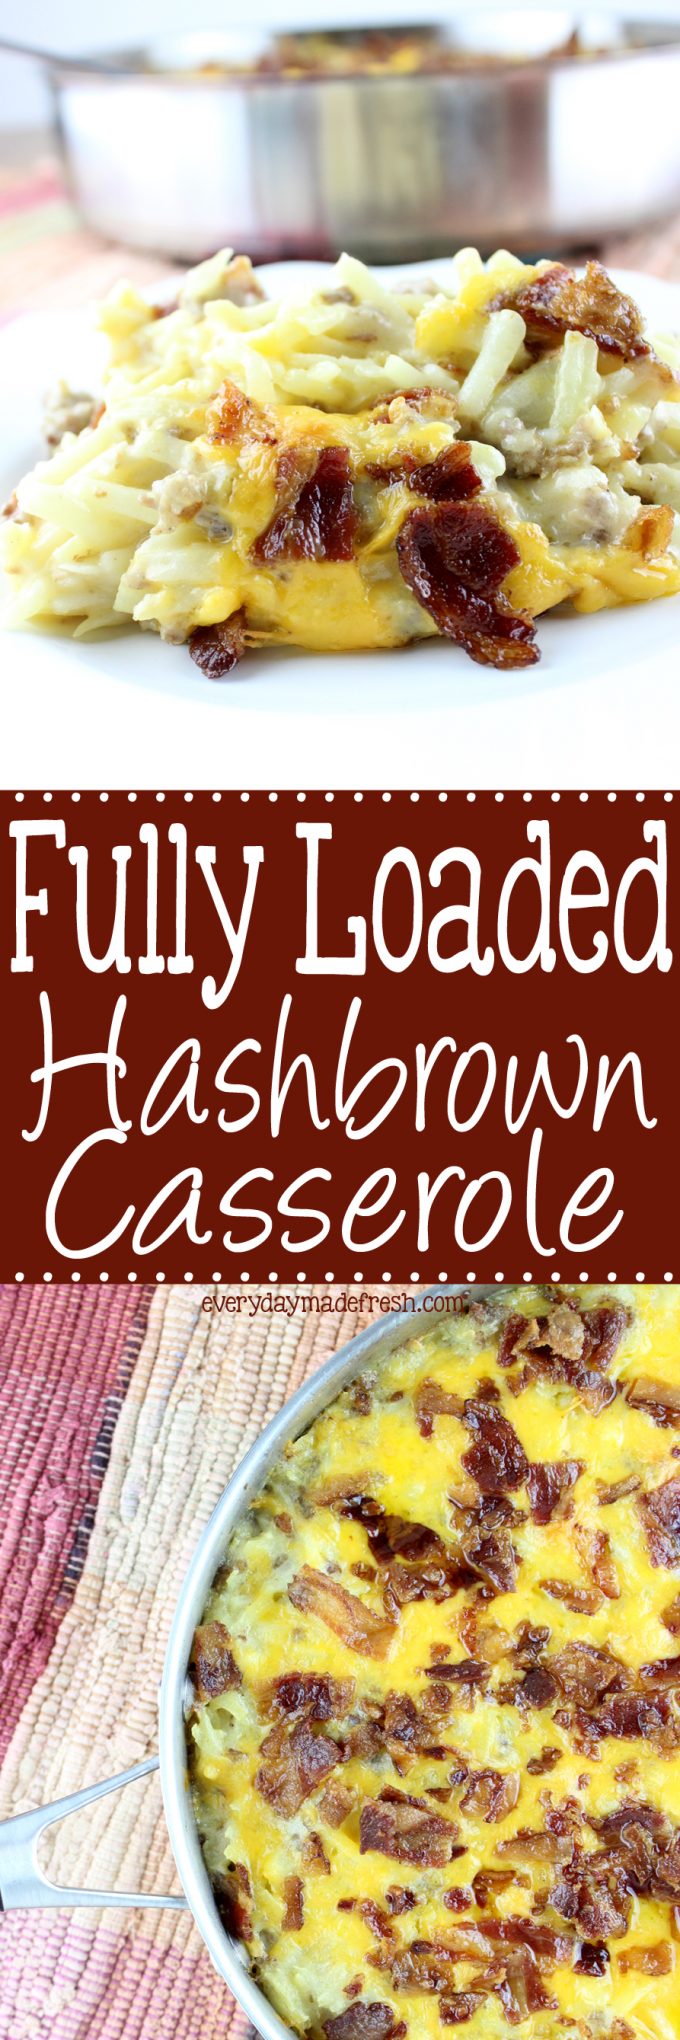 Fully Loaded Hash Brown Casserole is loaded with bacon, sausage, cheese, and delicious shredded potatoes! It's perfect for breakfast, brunch, dinner, or anytime of the day. | EverydayMadeFresh.com